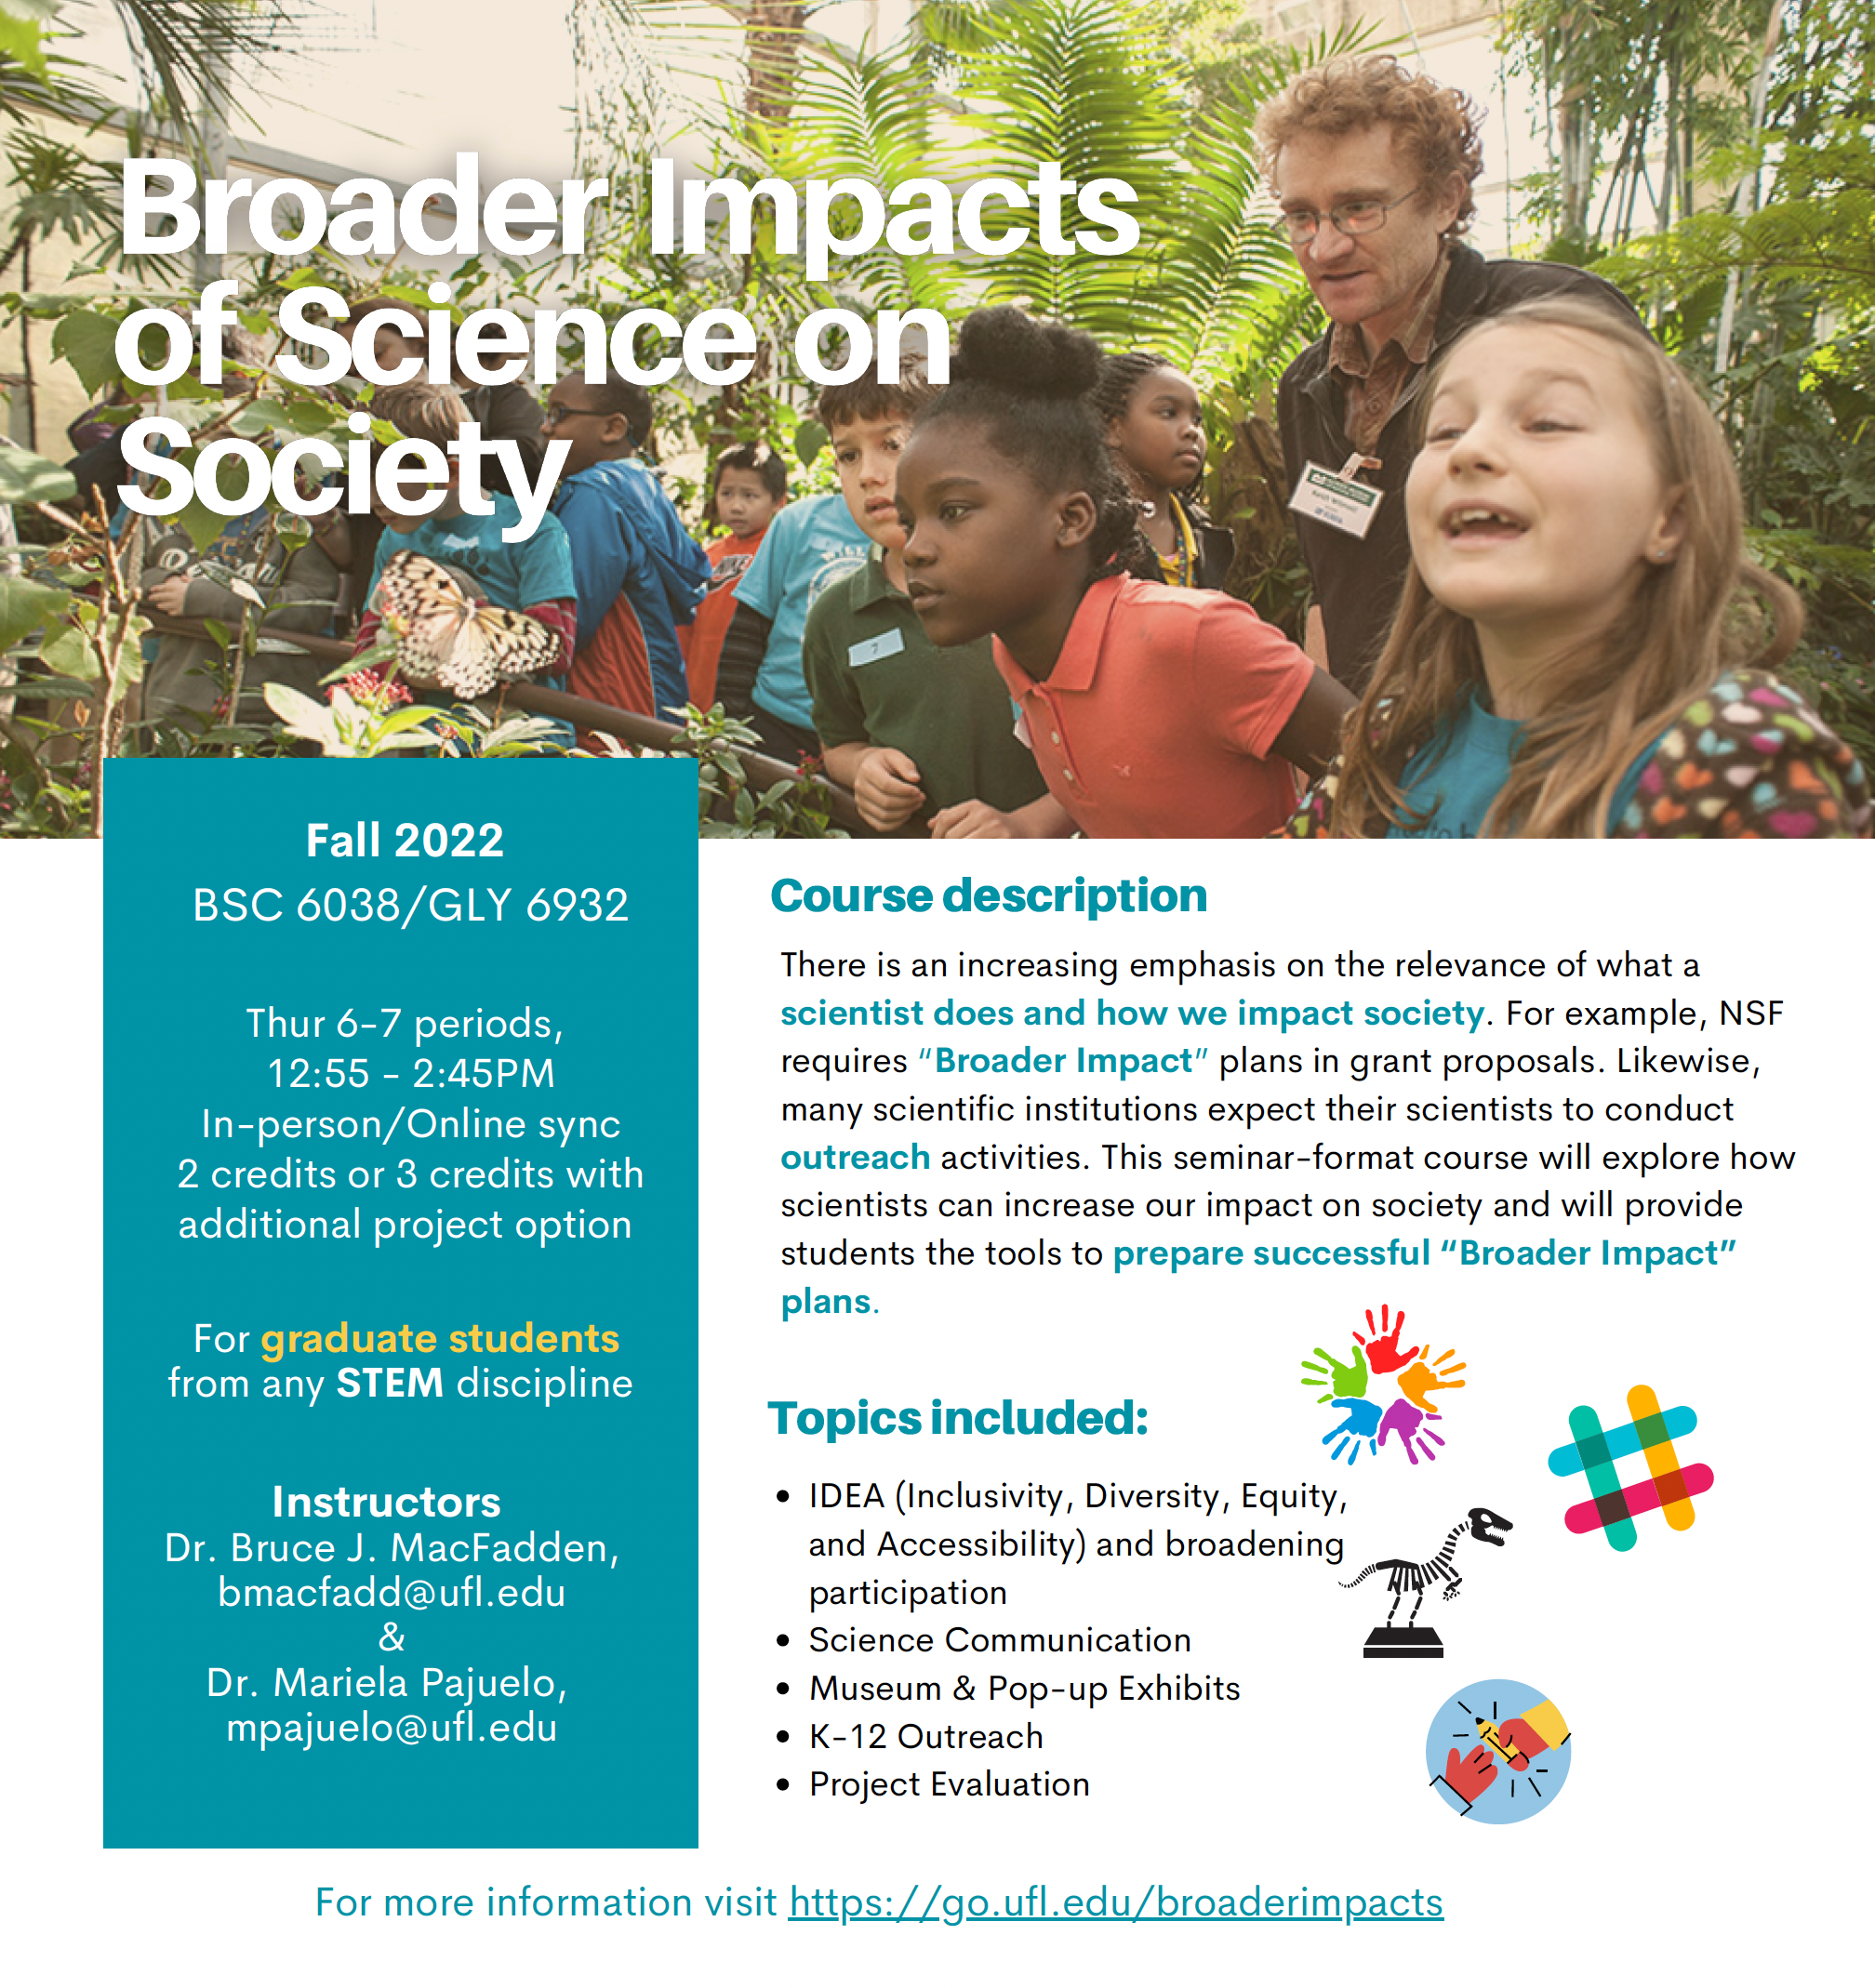 Course information for BSC 6038/ GLY 6932: Broader Impacts of Science on Society